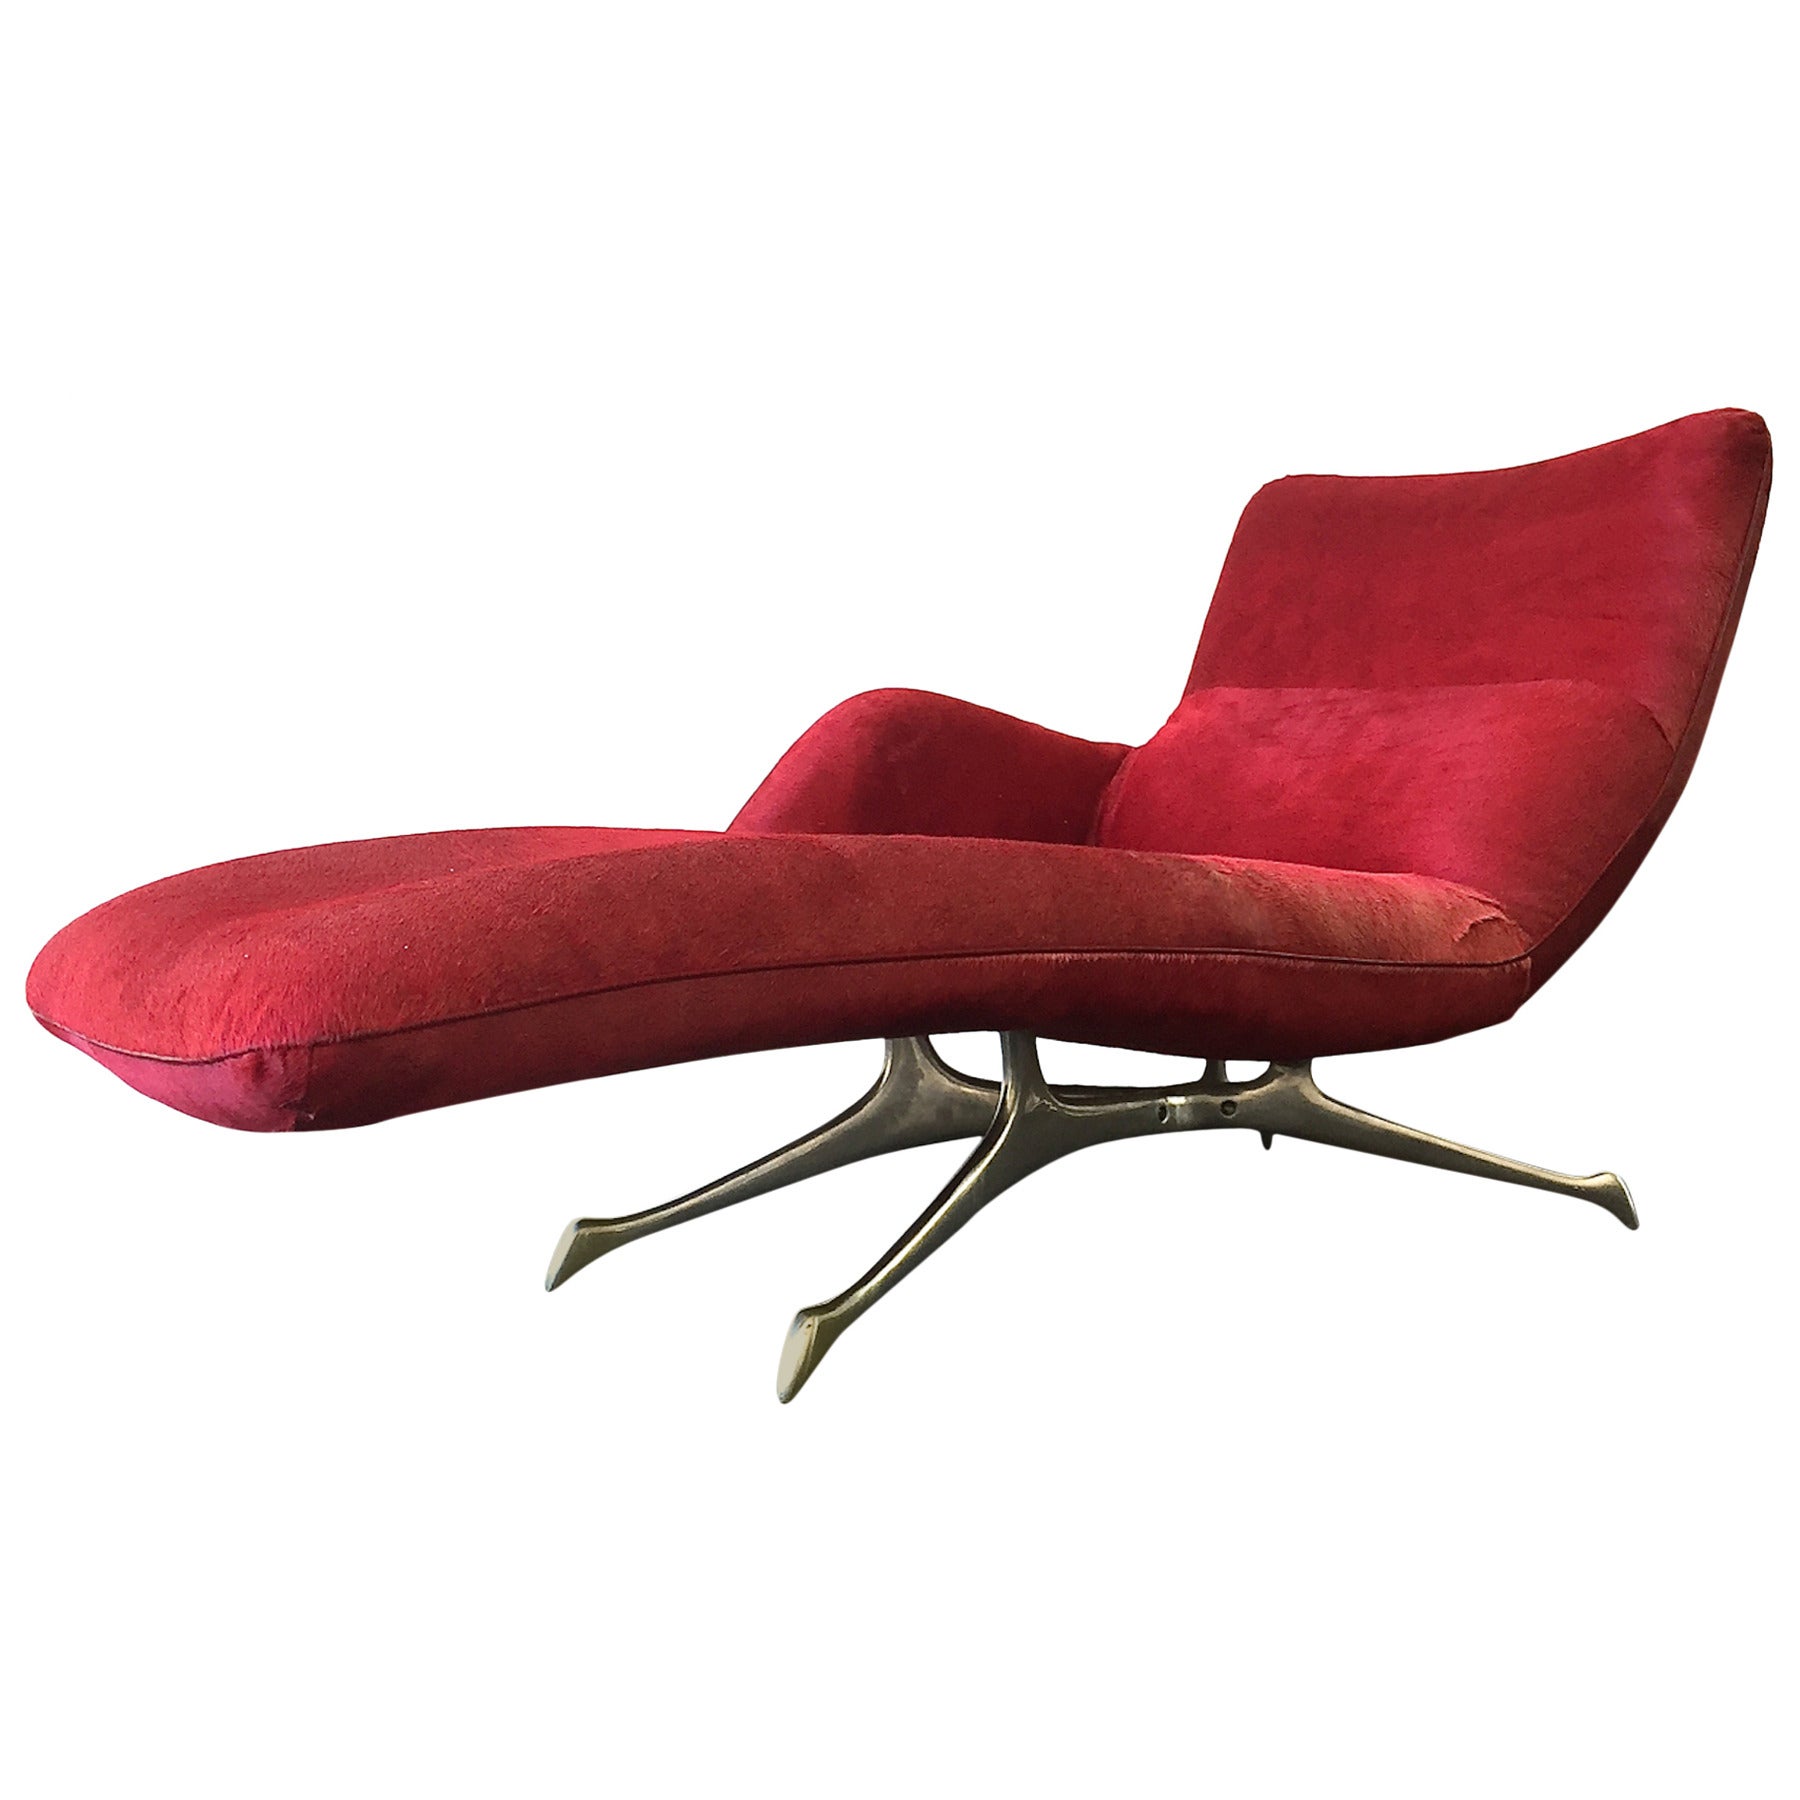 VK Chaise by Vladimir Kagan Covered in Red Fur